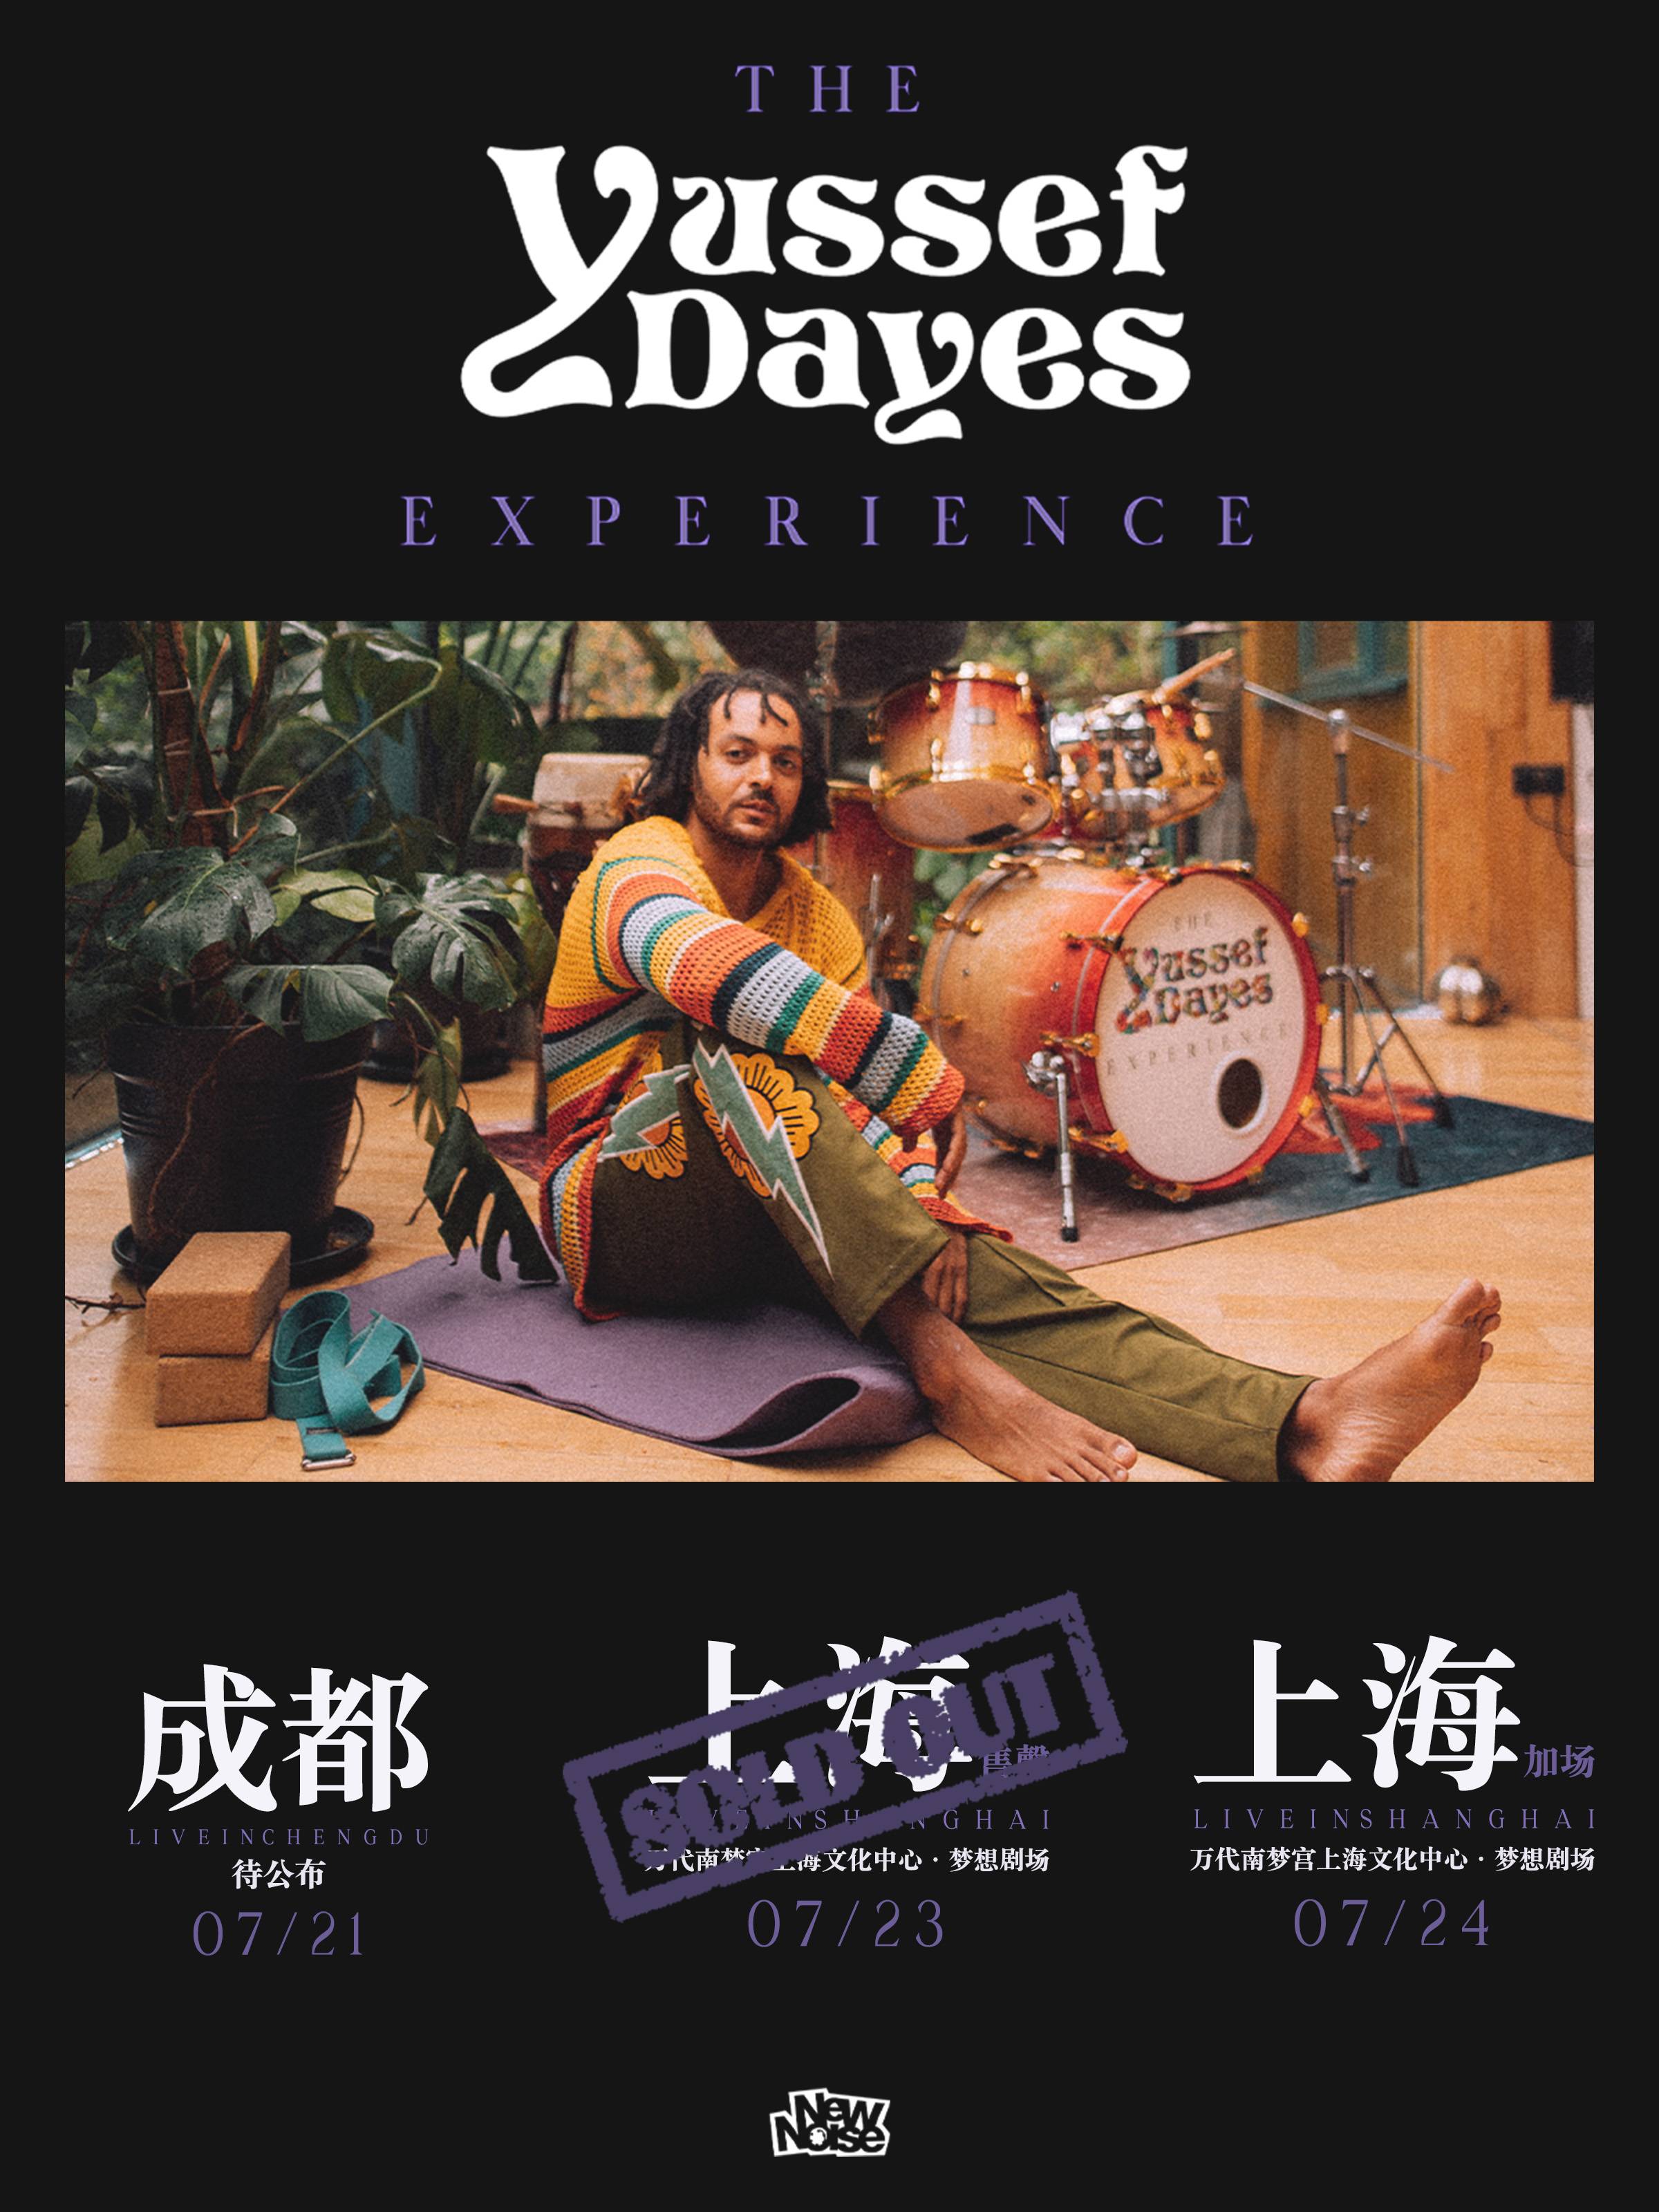 The Yussef Dayes Experience - Shanghai